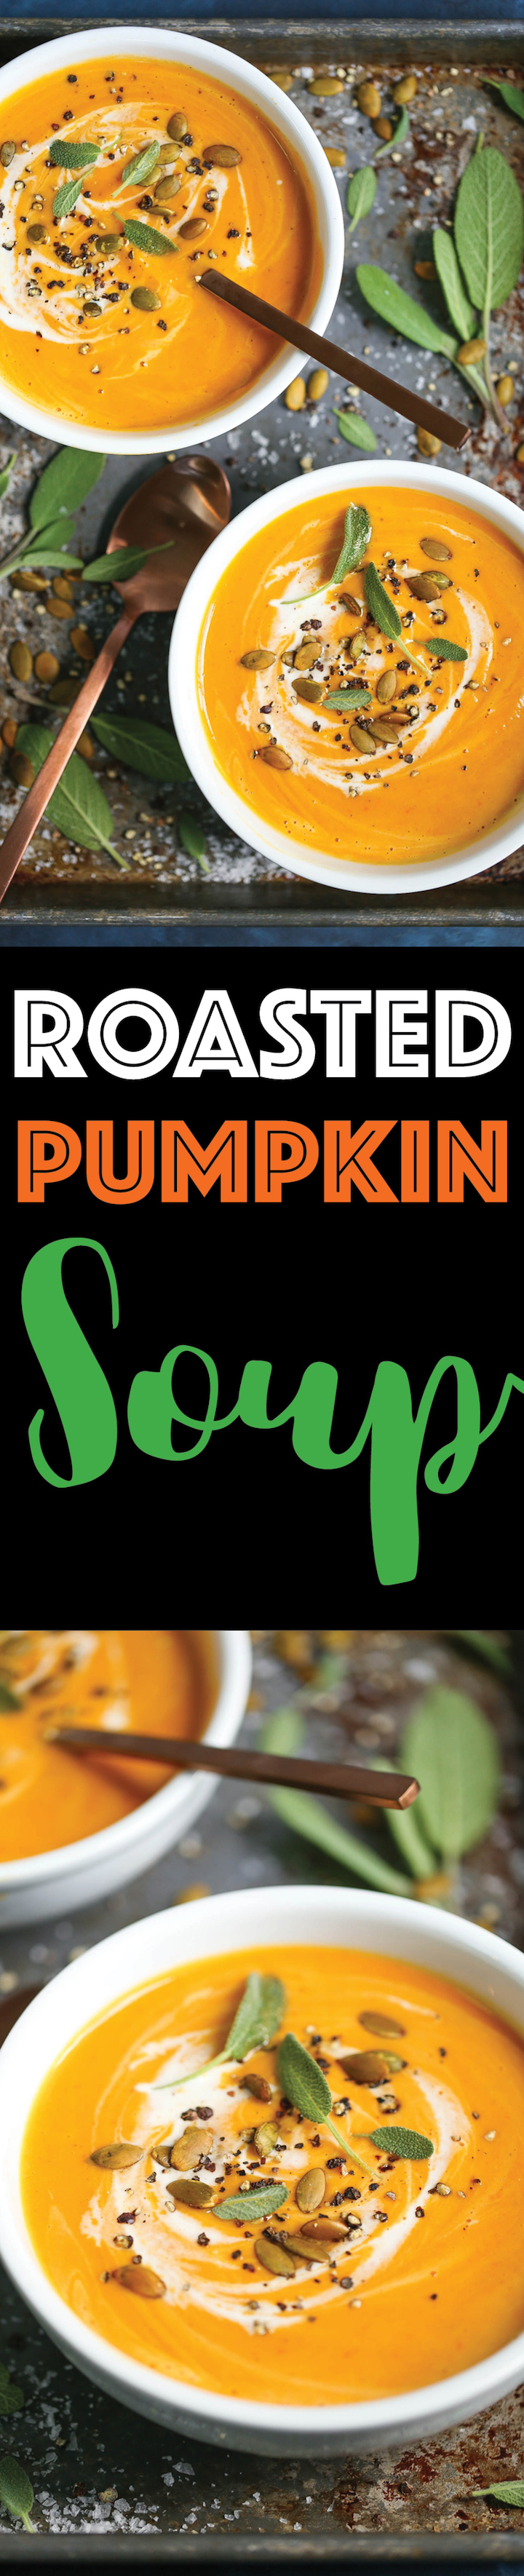 Roasted Pumpkin Soup - The easiest pumpkin soup (ever) made completely from scratch with sugar pumpkins! Thick, creamy, cozy, and so so good.